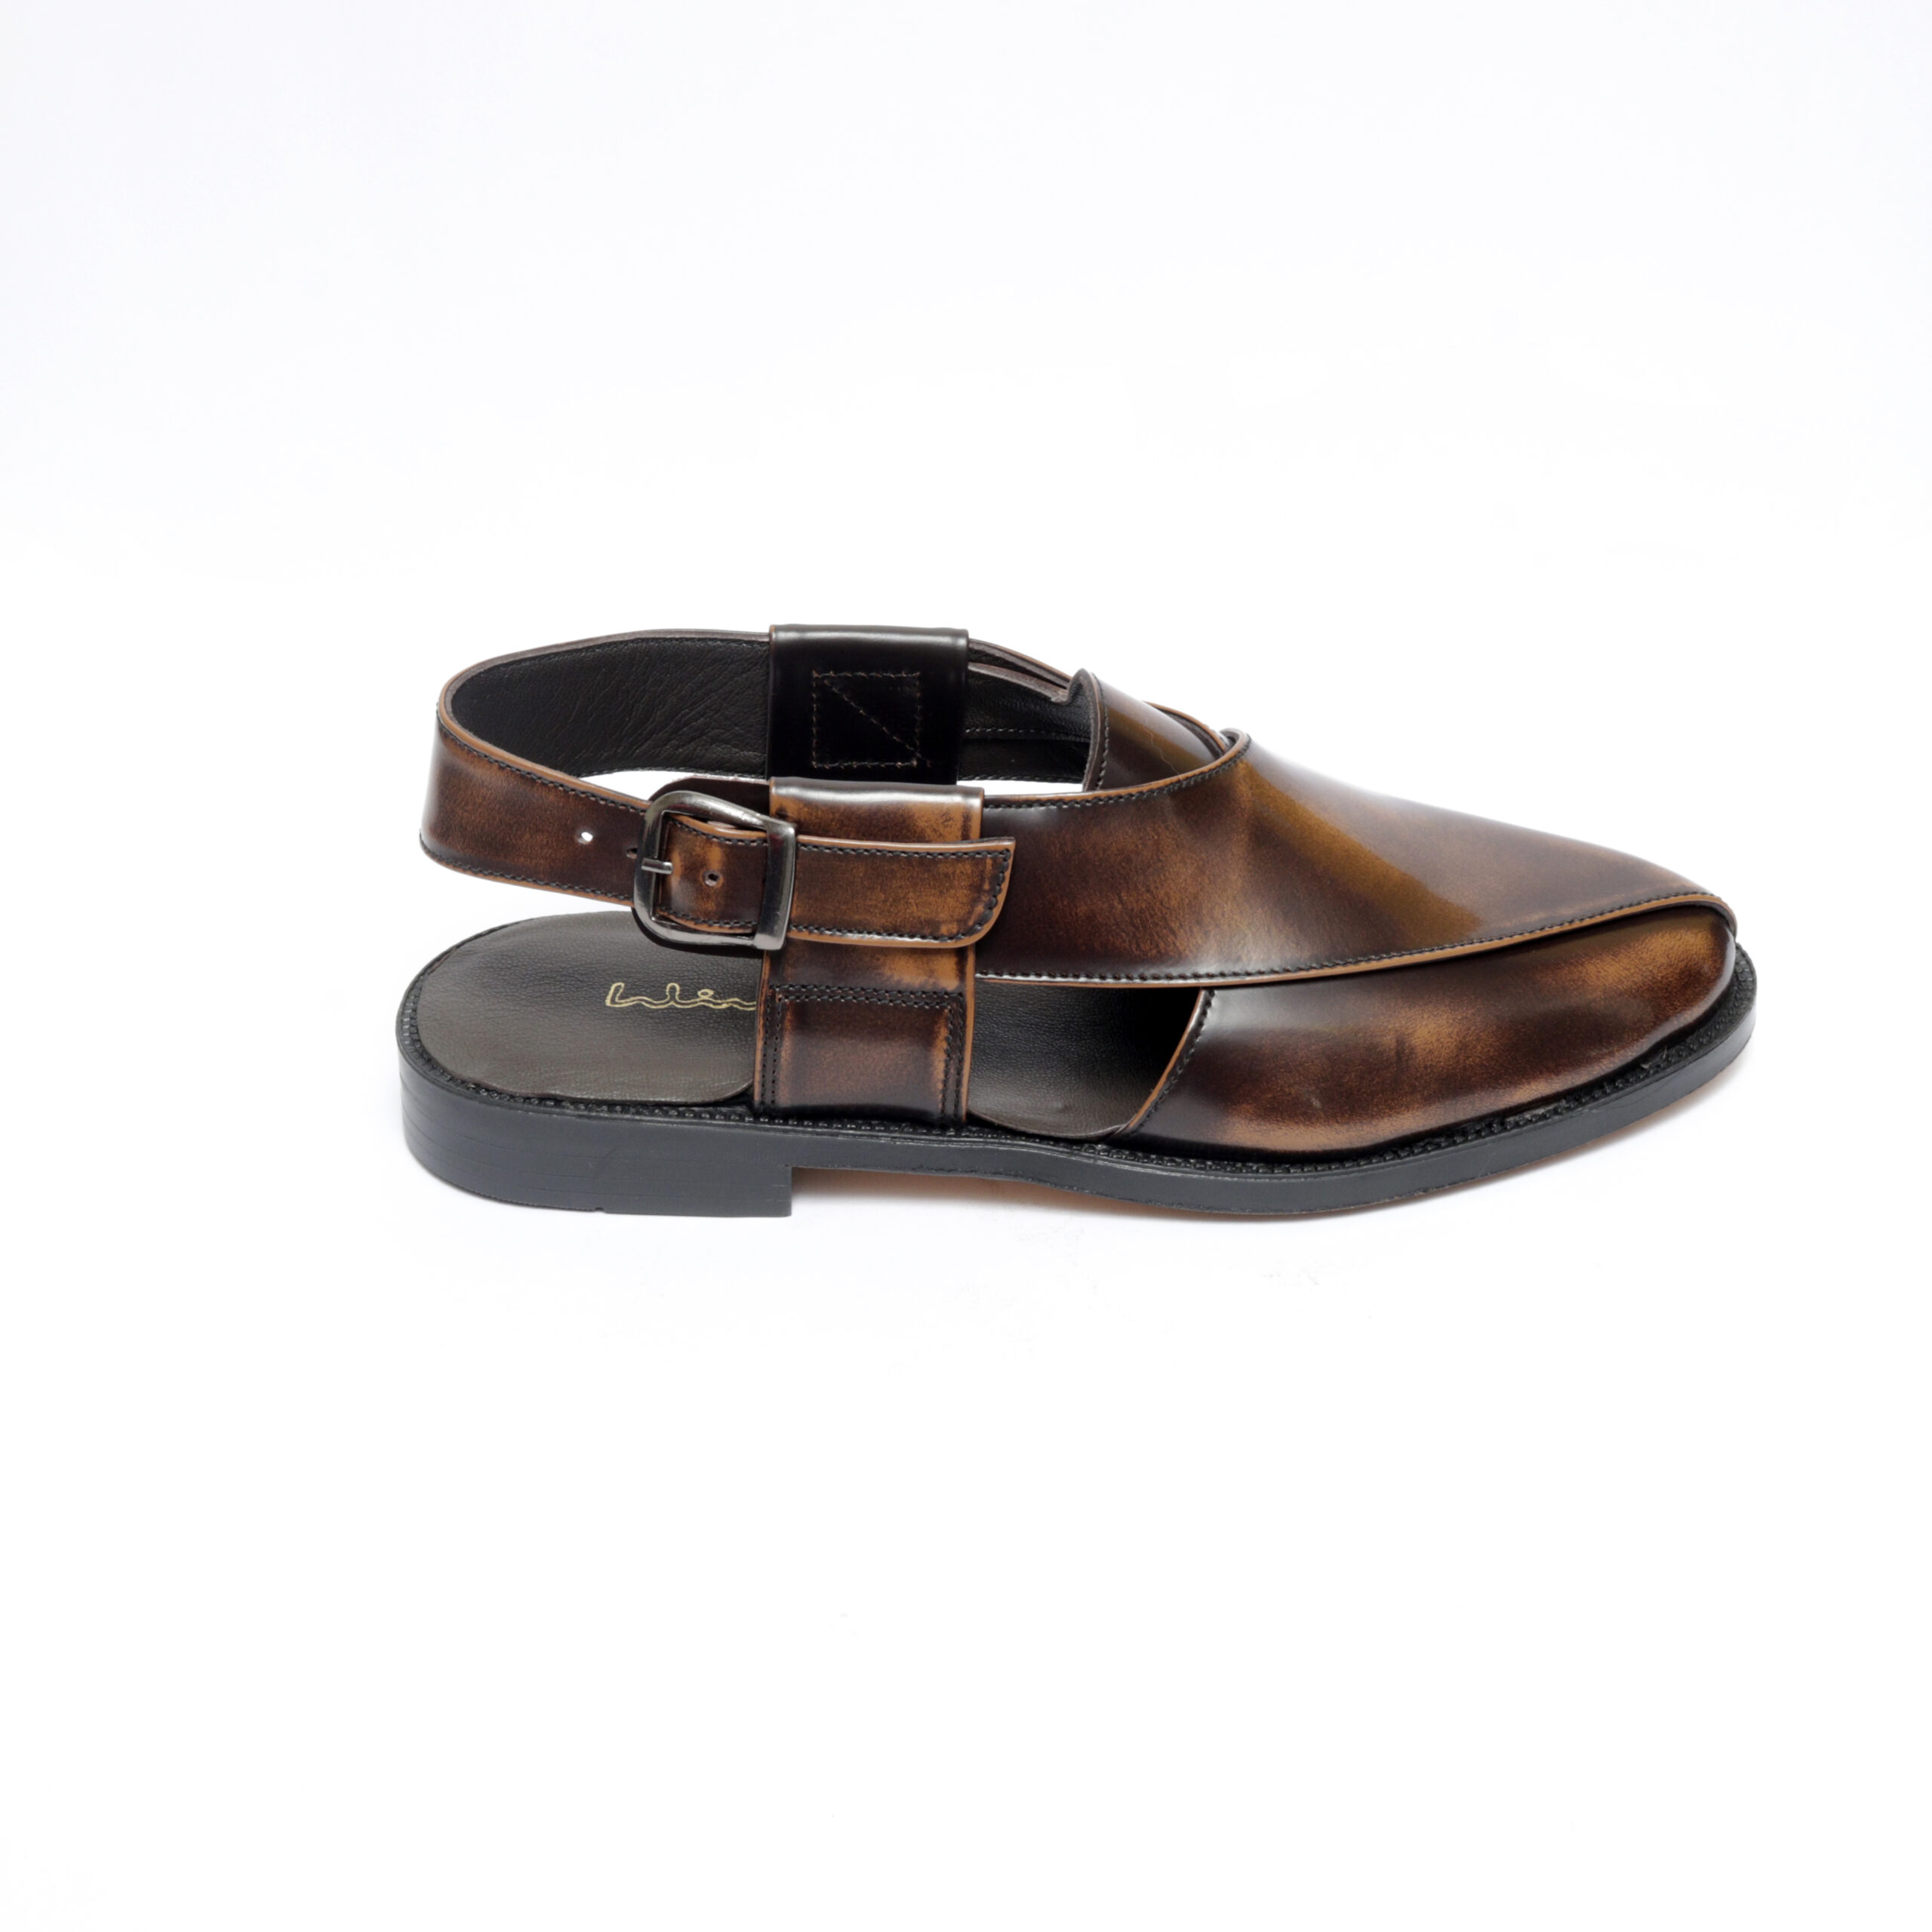 Formal Sandals,Coffee Casual Sandals,Coffee Partywear Sandals For men, Men's  Footwear, Footwear, Wedding Sandals, Simple